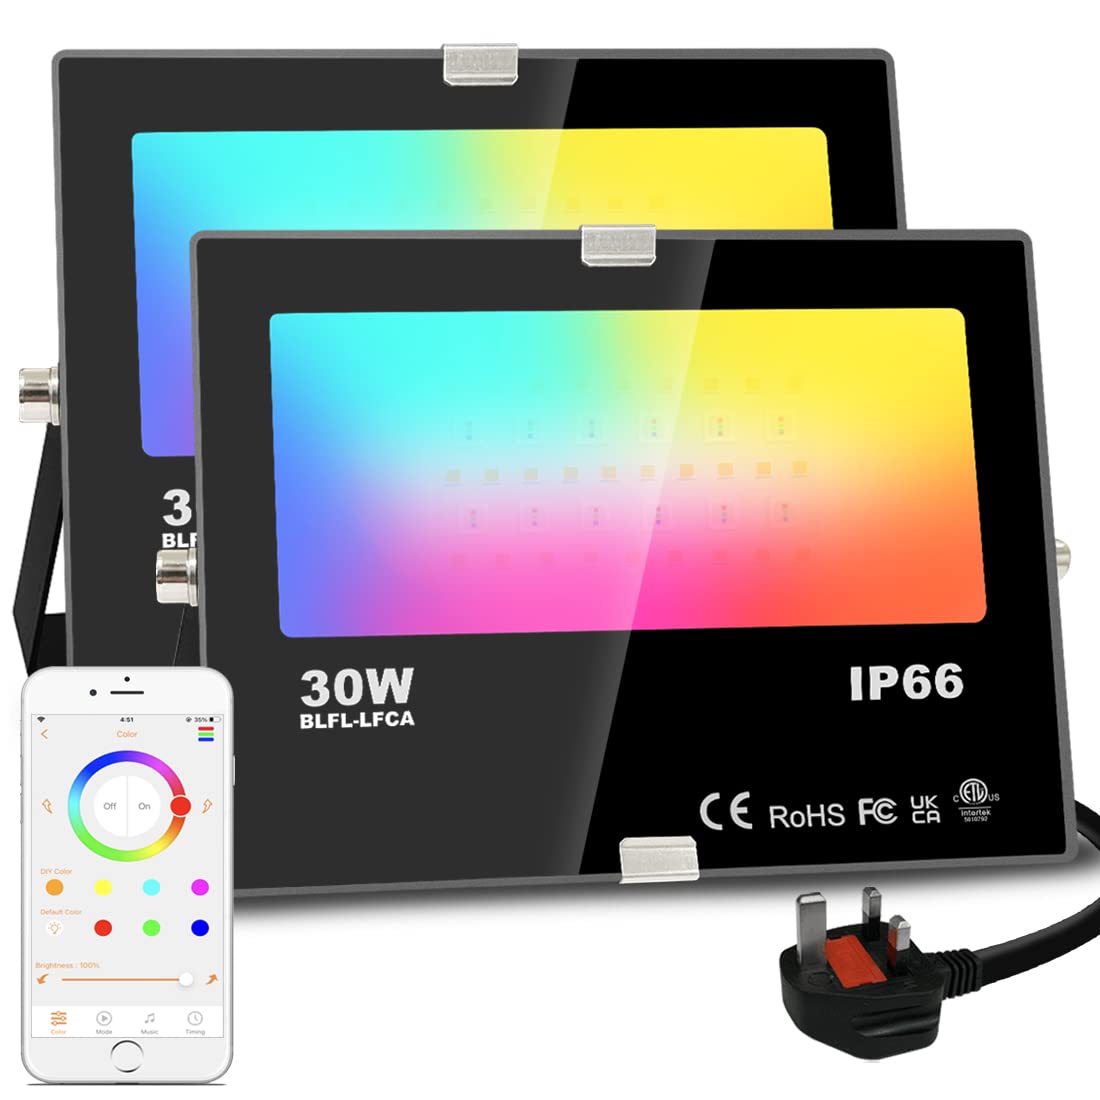 LED Floodlight 300W Equivalent 3000LM, Smart RGB Flood Lights Outdoor with APP Control, Colour Changing + Warm White, Timing - Scene - Garden Lighting, IP66, UK Plug（2 Packs)